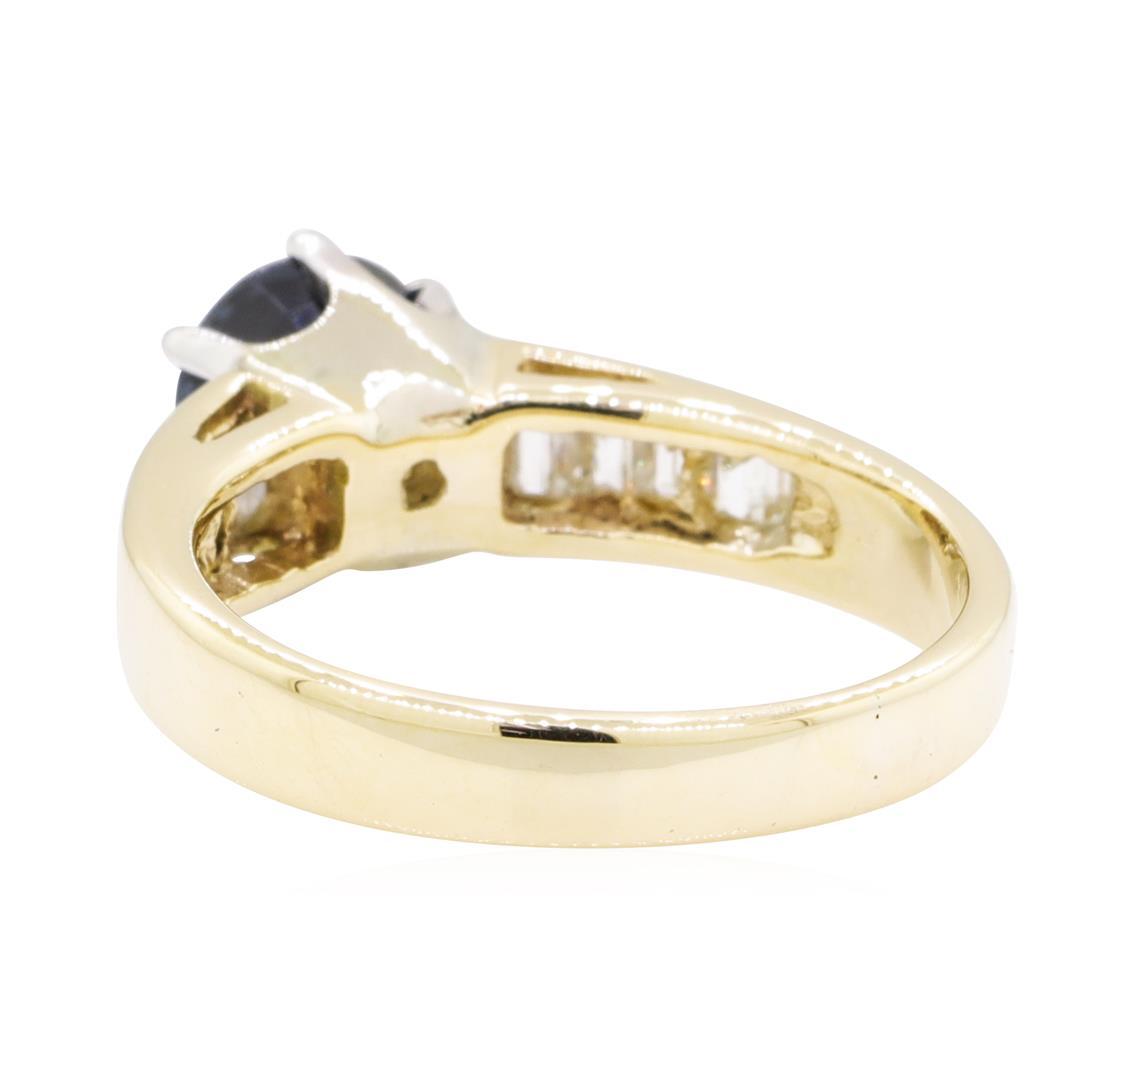 1.55 ctw Sapphire and Diamond Ring - 14KT Yellow and White Gold